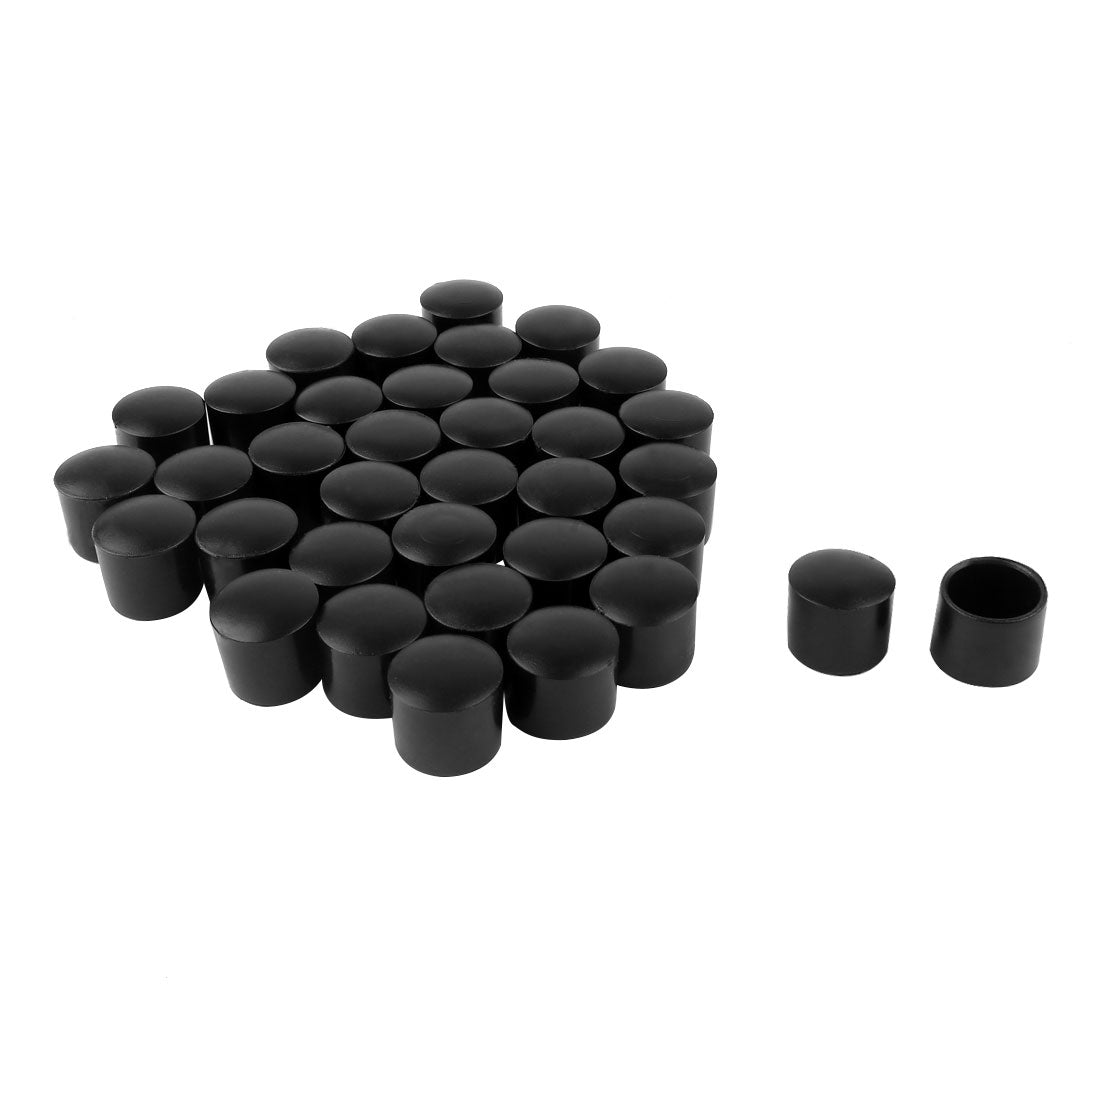 uxcell Uxcell PVC Leg Caps Tips Cup Feet Covers 12mm 0.47" Inner Dia 36pcs Anti-moisture Floor Protector for Furniture Chair Desk